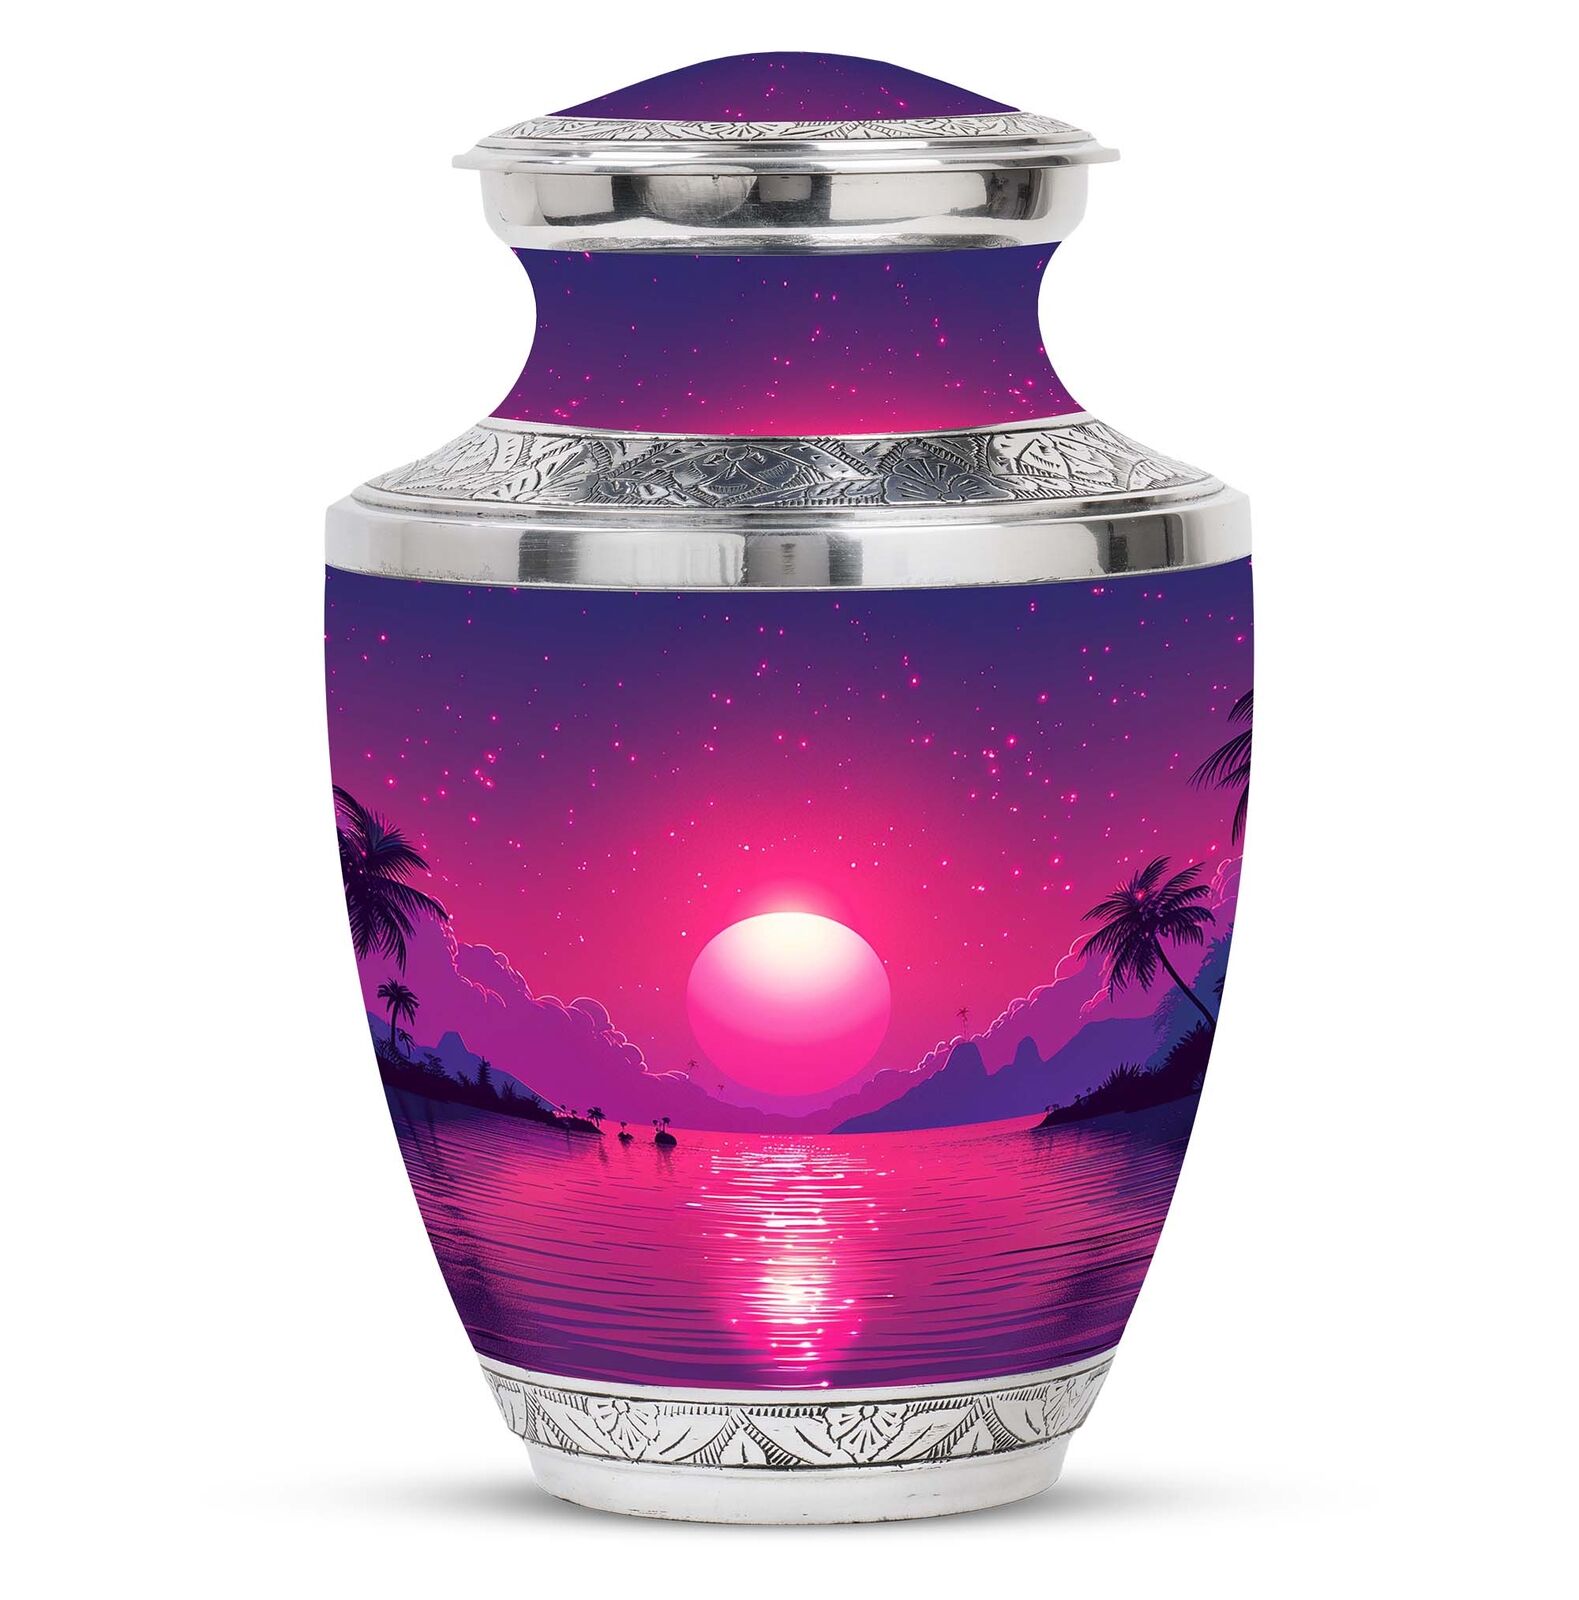 A Celestial Dance at Tropical Twilight Large Urns For Ashes Size 10 Inch